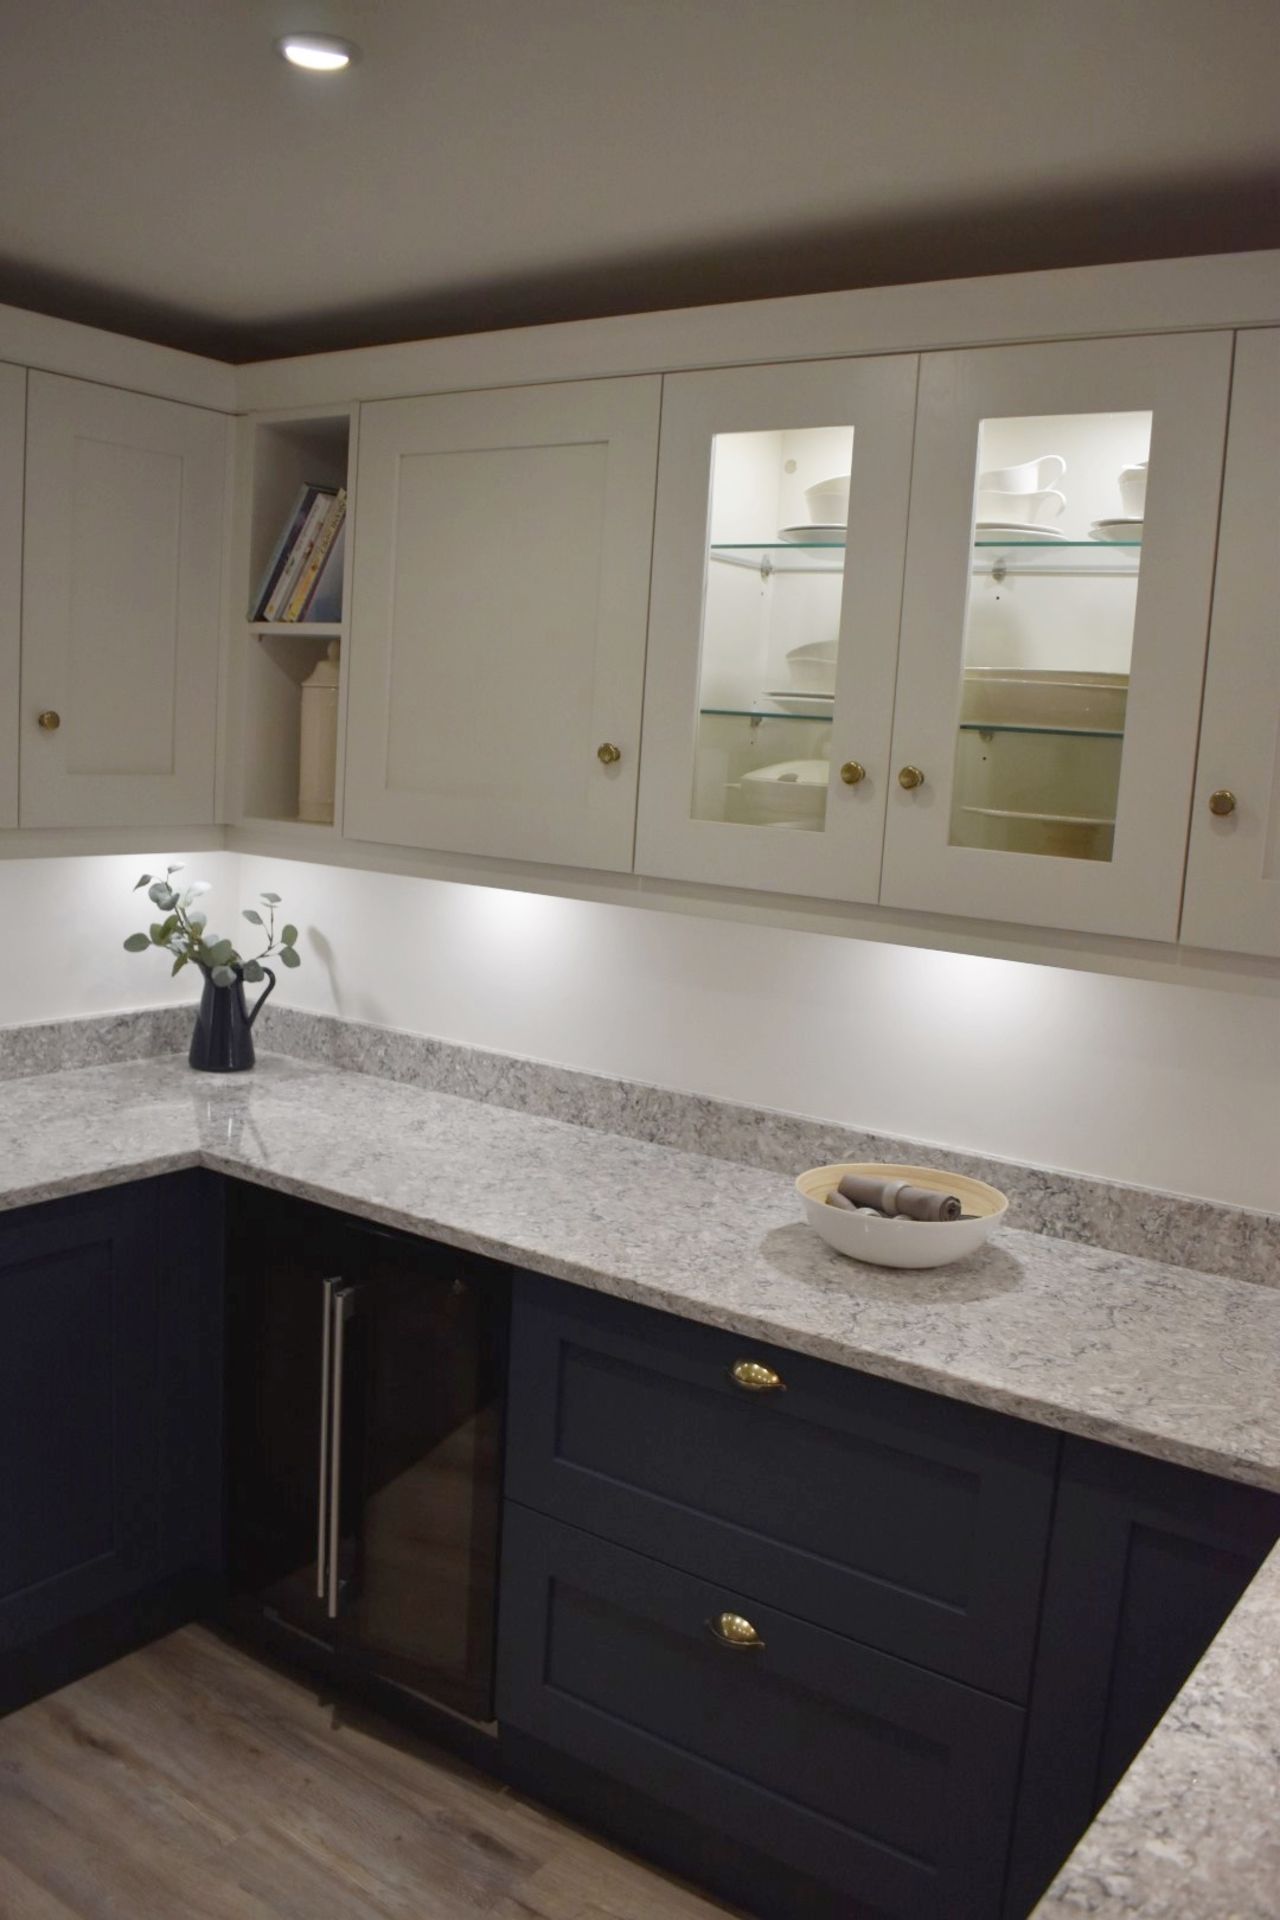 1 x 'Mornington' Shaker-style Feature-rich Fitted Kitchen in Blue, with Premium Branded Appliances - Image 61 of 67